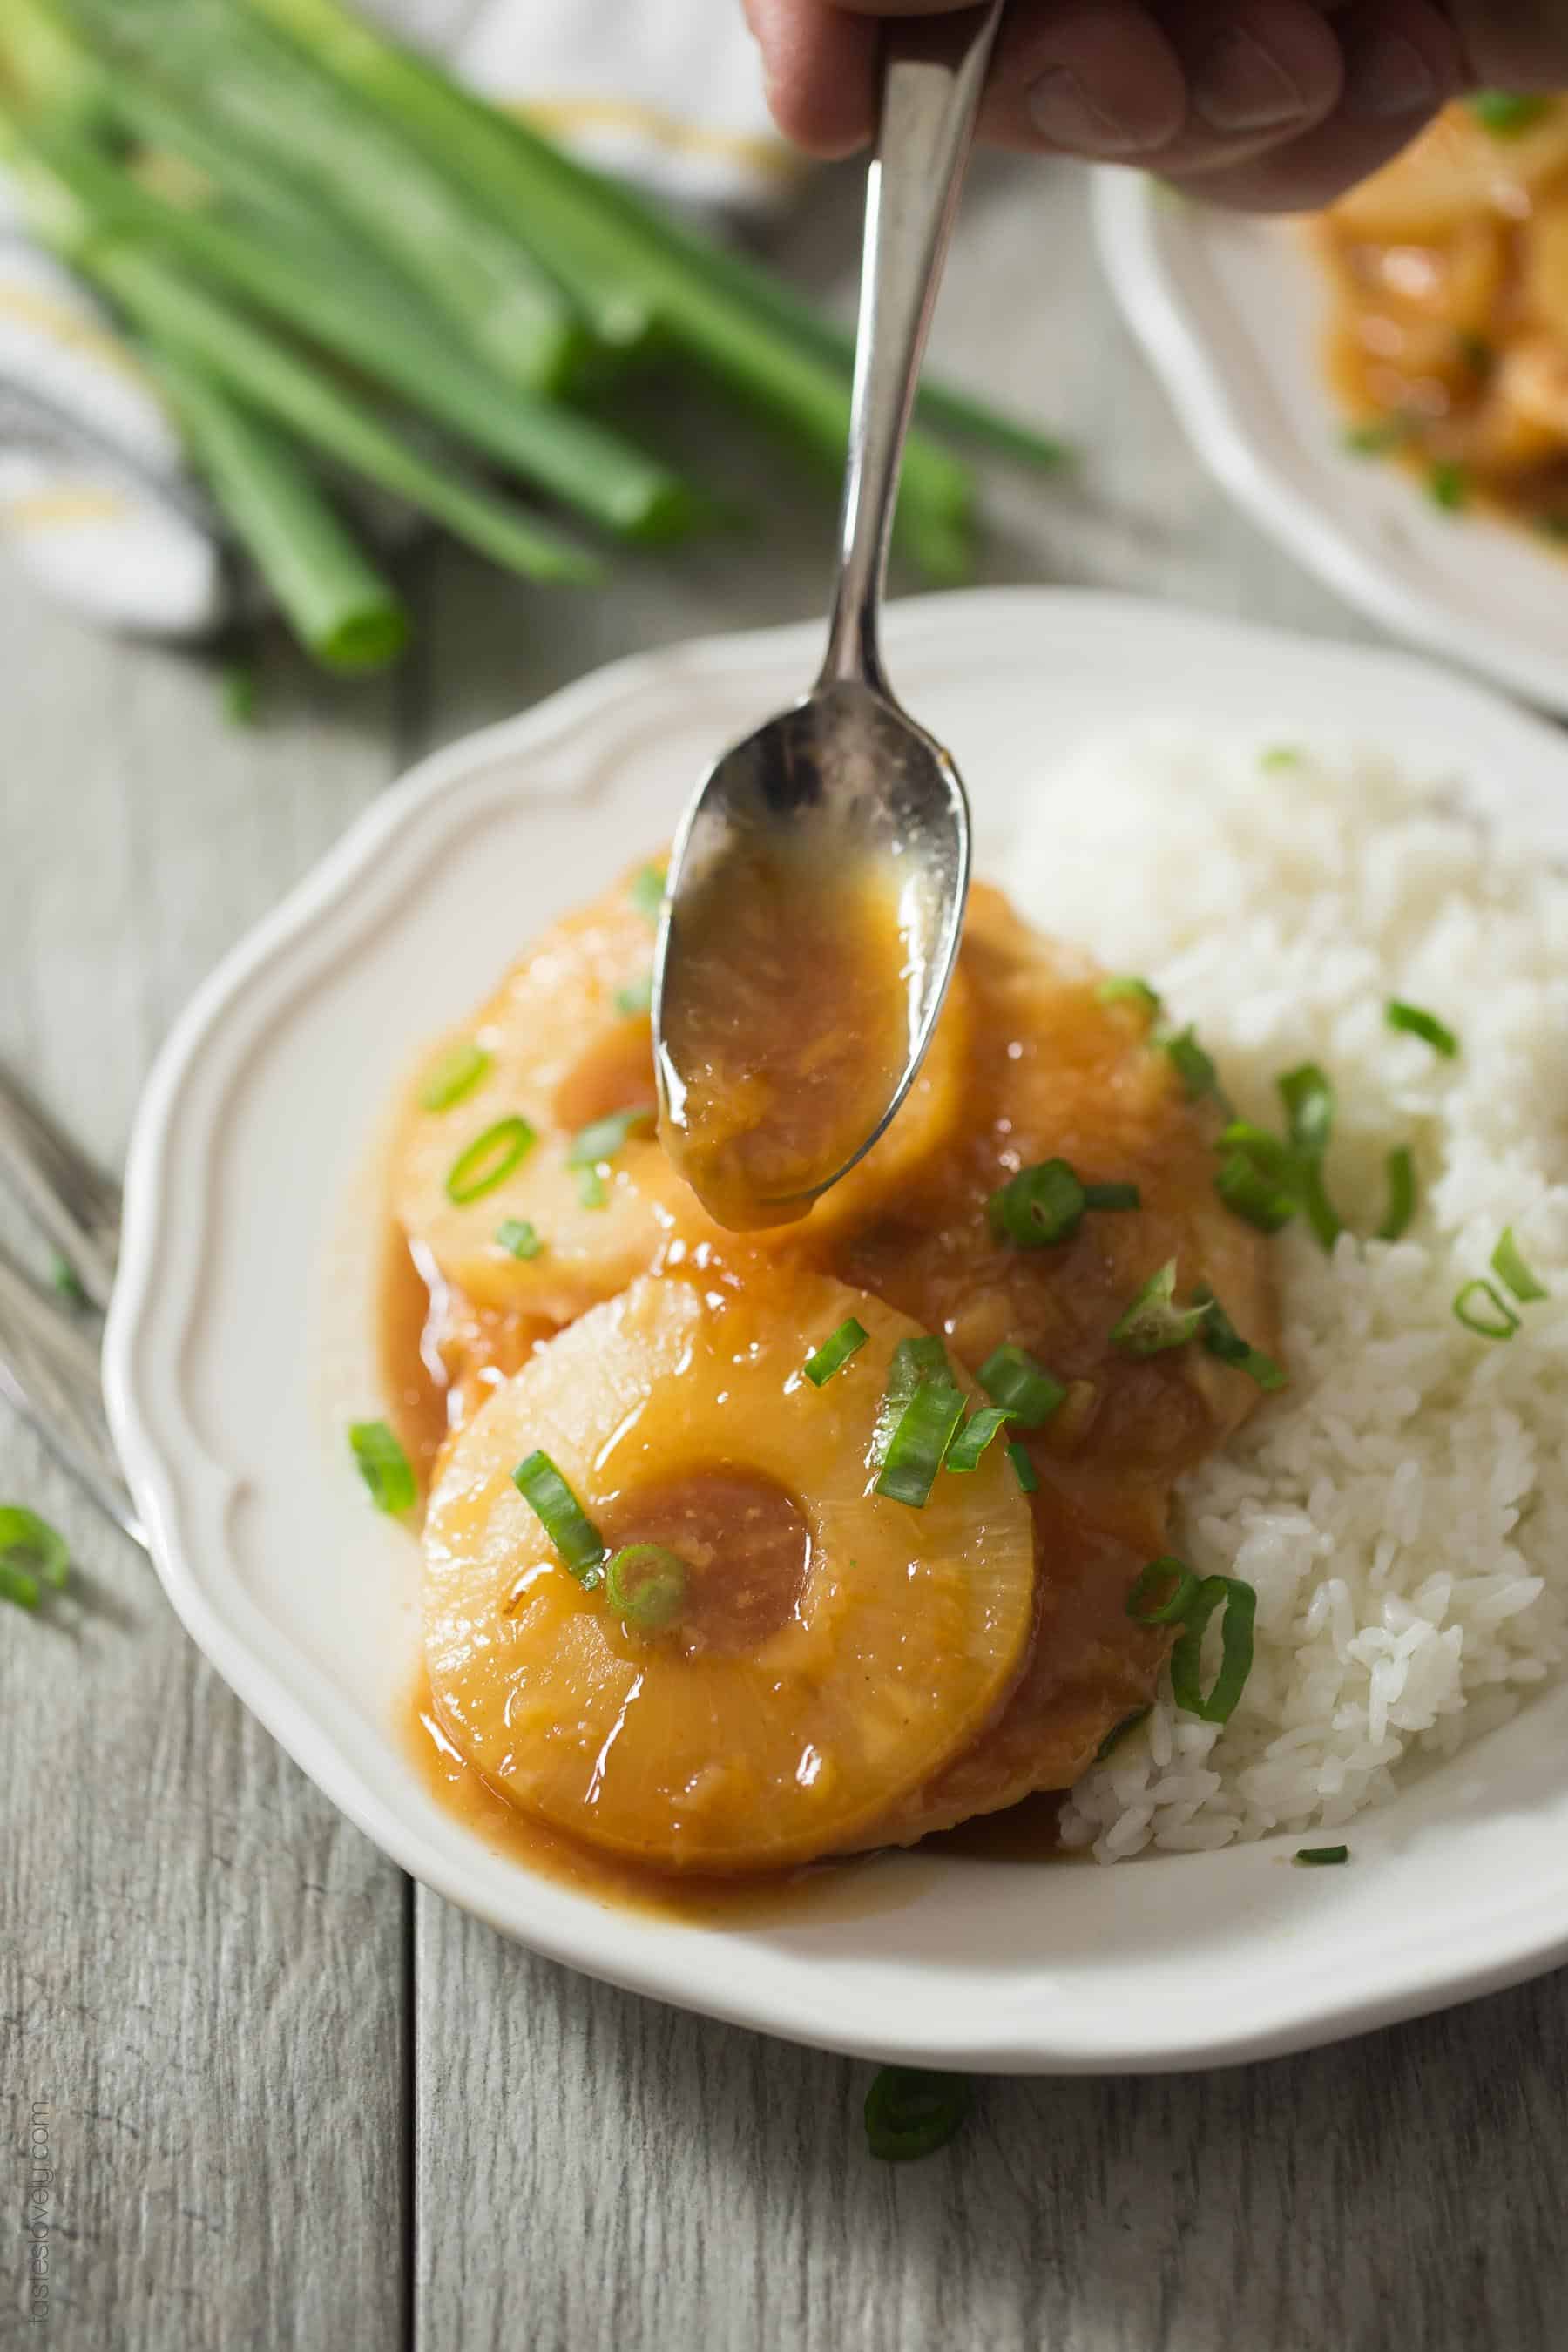 Slow Cooker Hawaiian Pineapple Chicken - a sweet and tangy crockpot dinner recipe the whole family will love! (gluten free, grain free, dairy free)